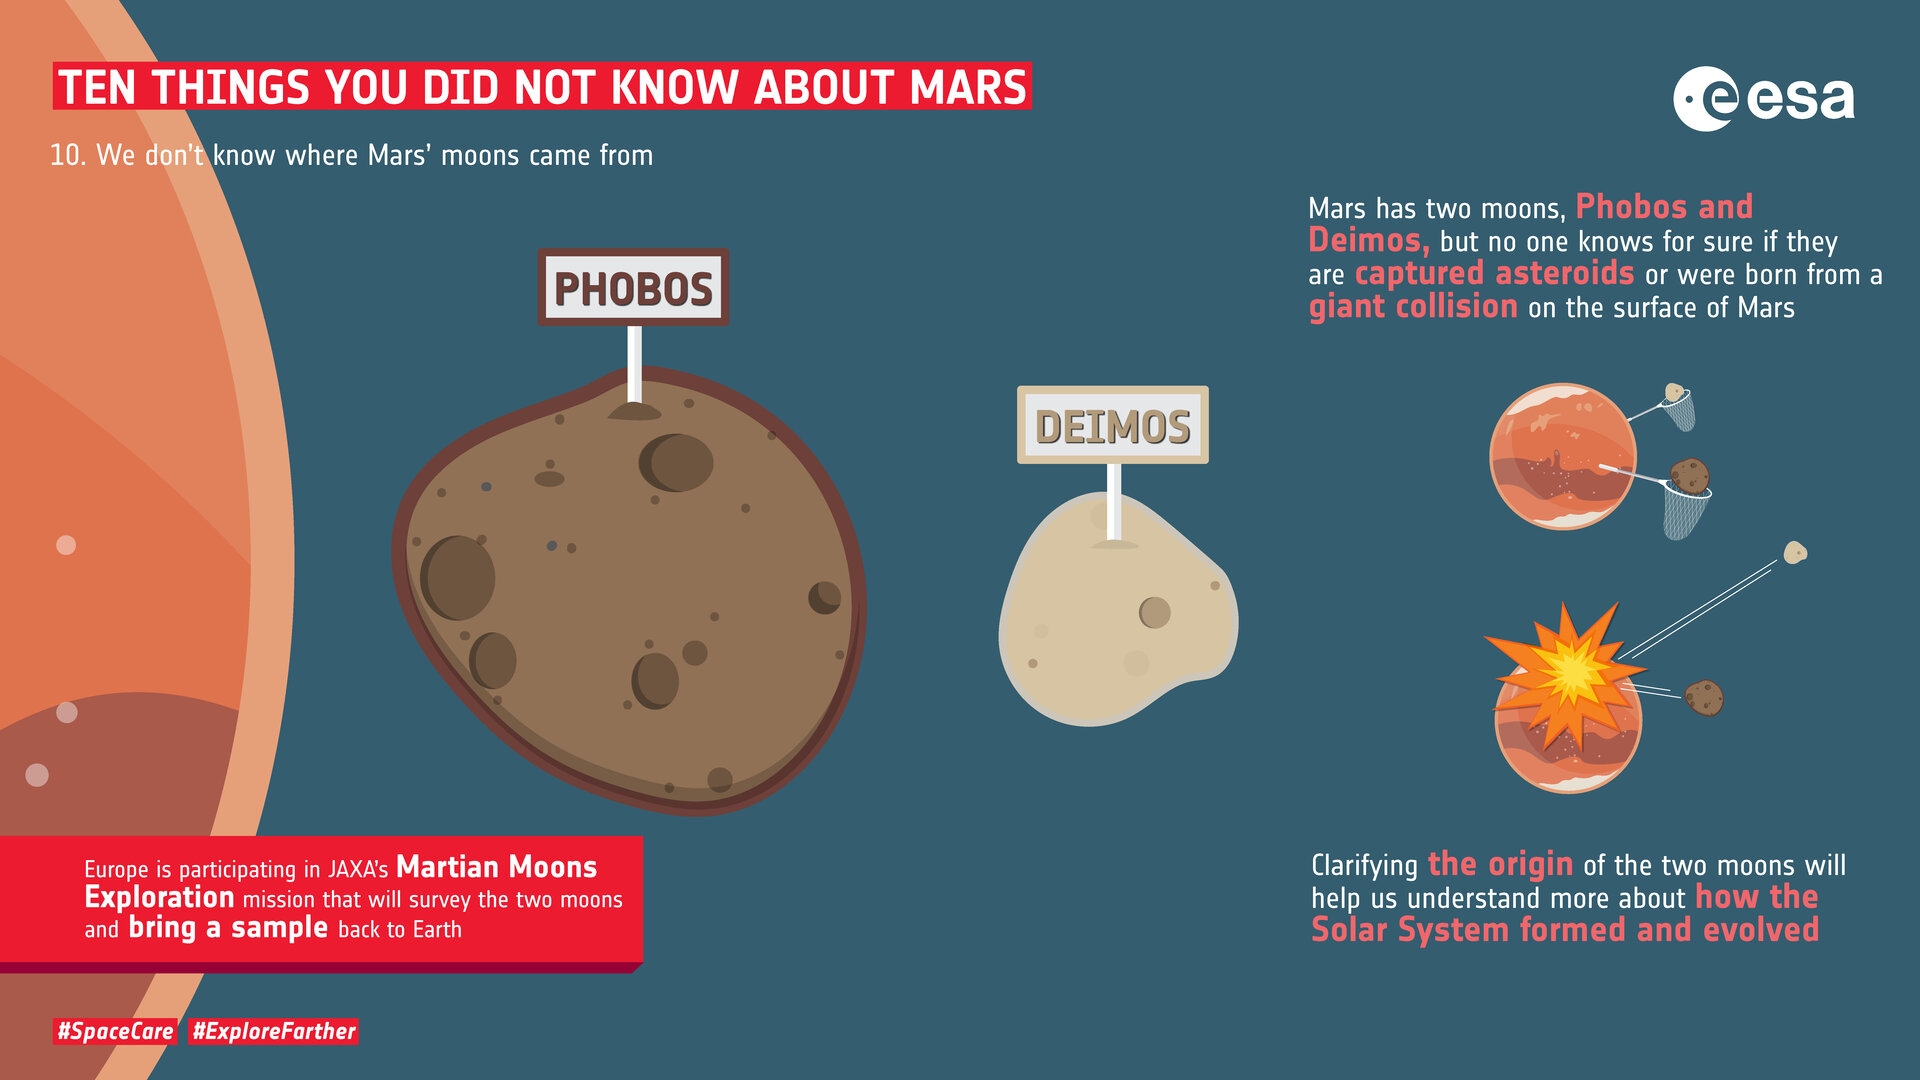 Ten things you did not know about Mars: 10. Moons